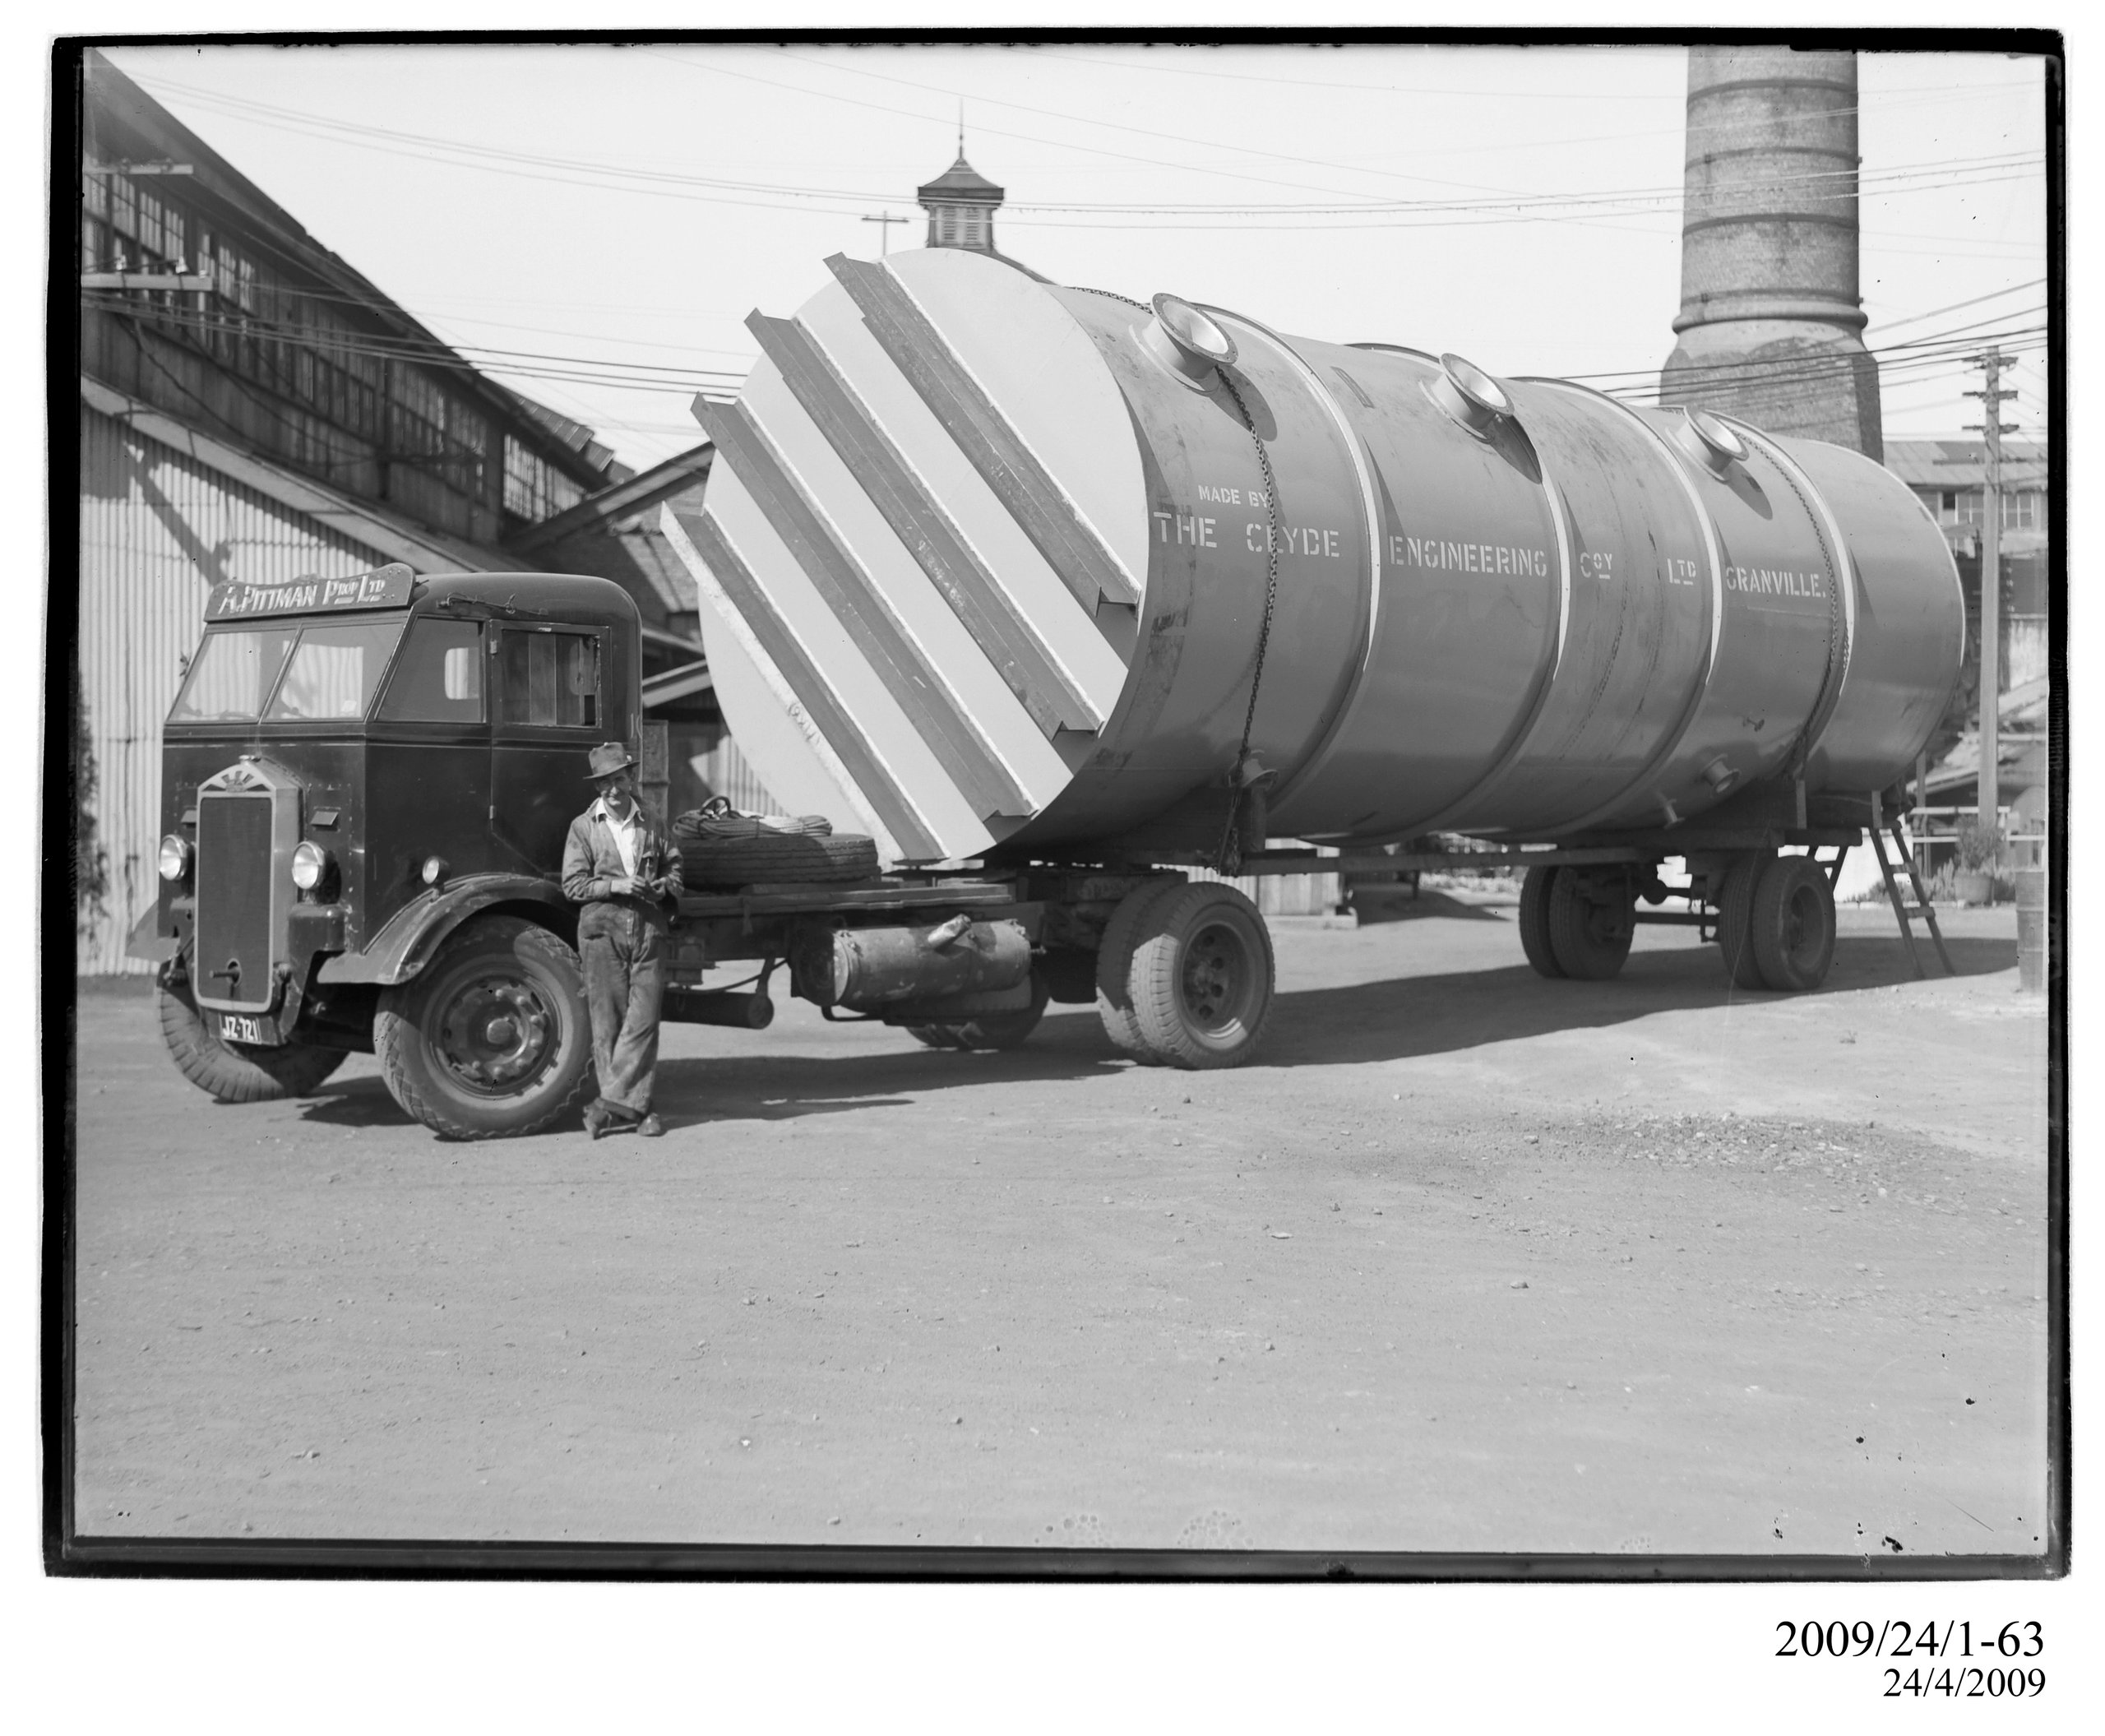 Large cylindrical vessel on A. Pittman 'Albion' articulated truck in works yard